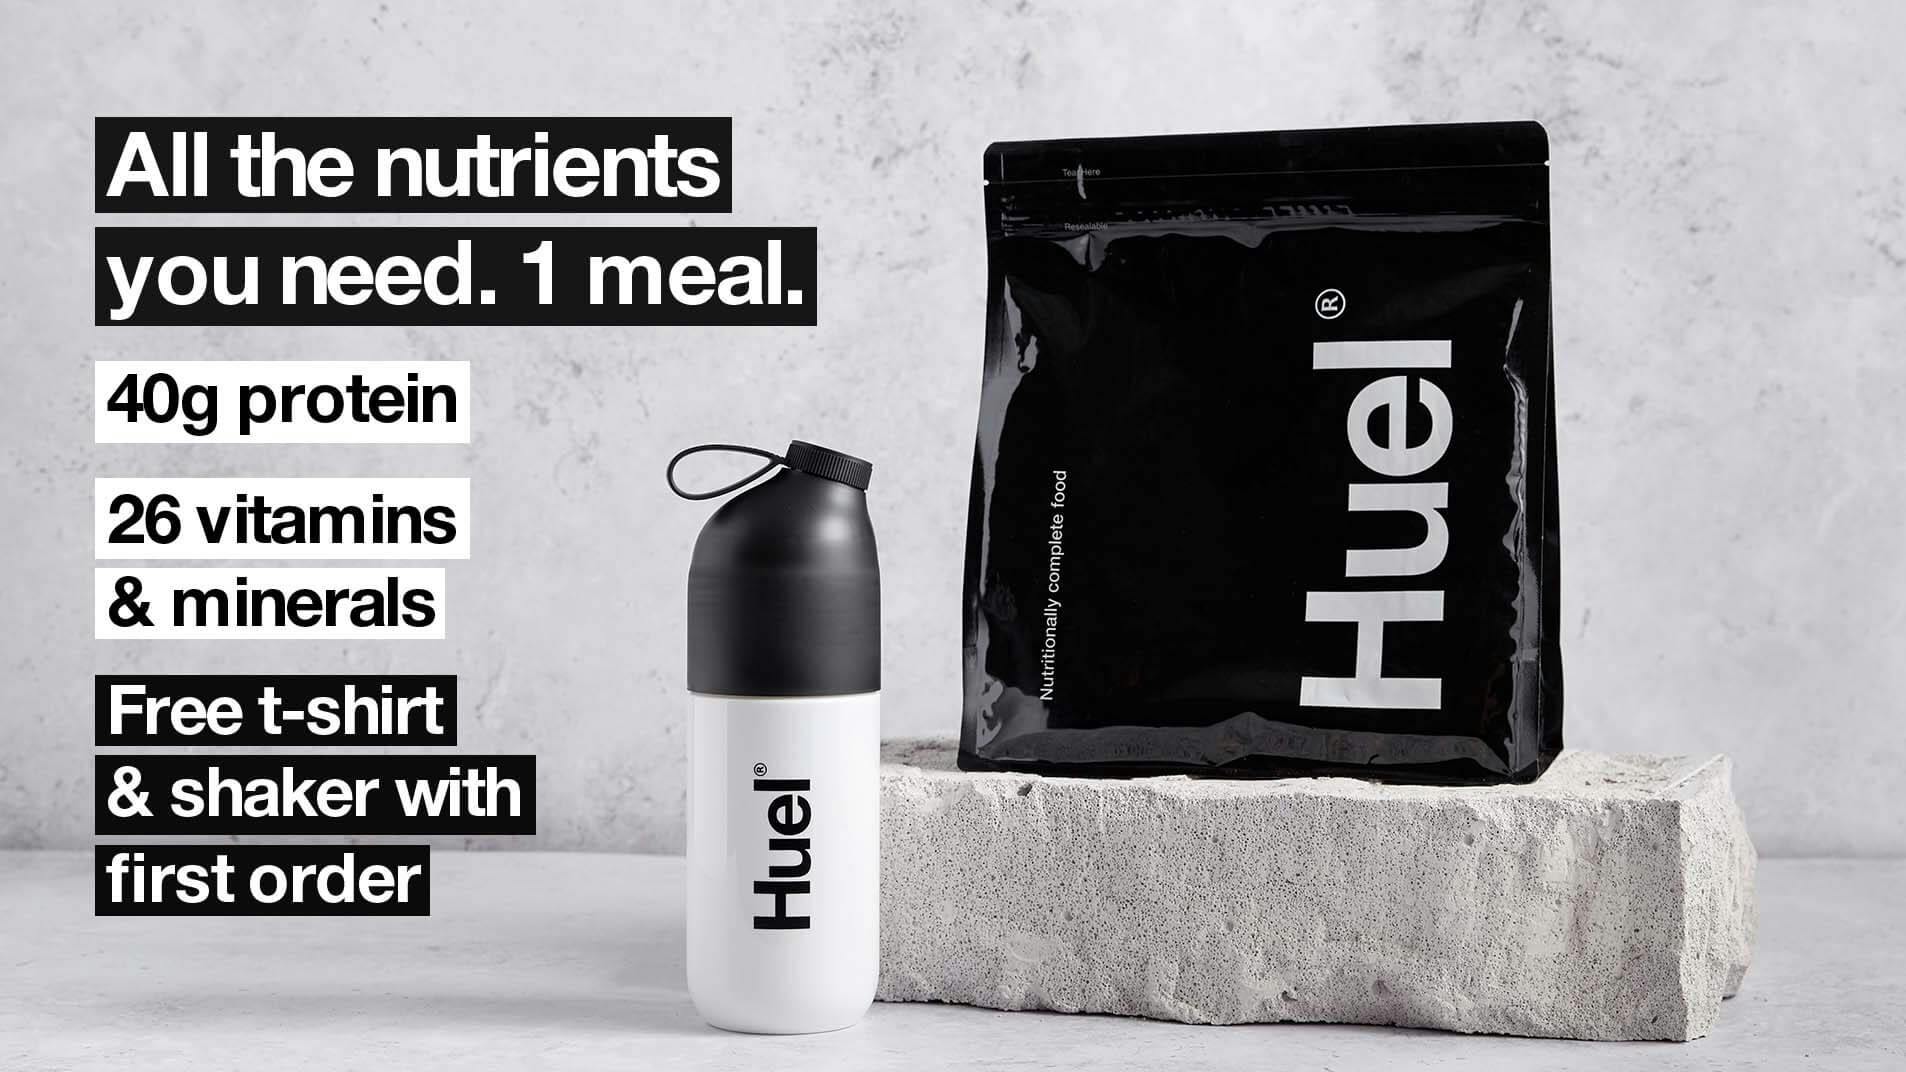 Huel - Since releasing Black Edition this is one of the questions